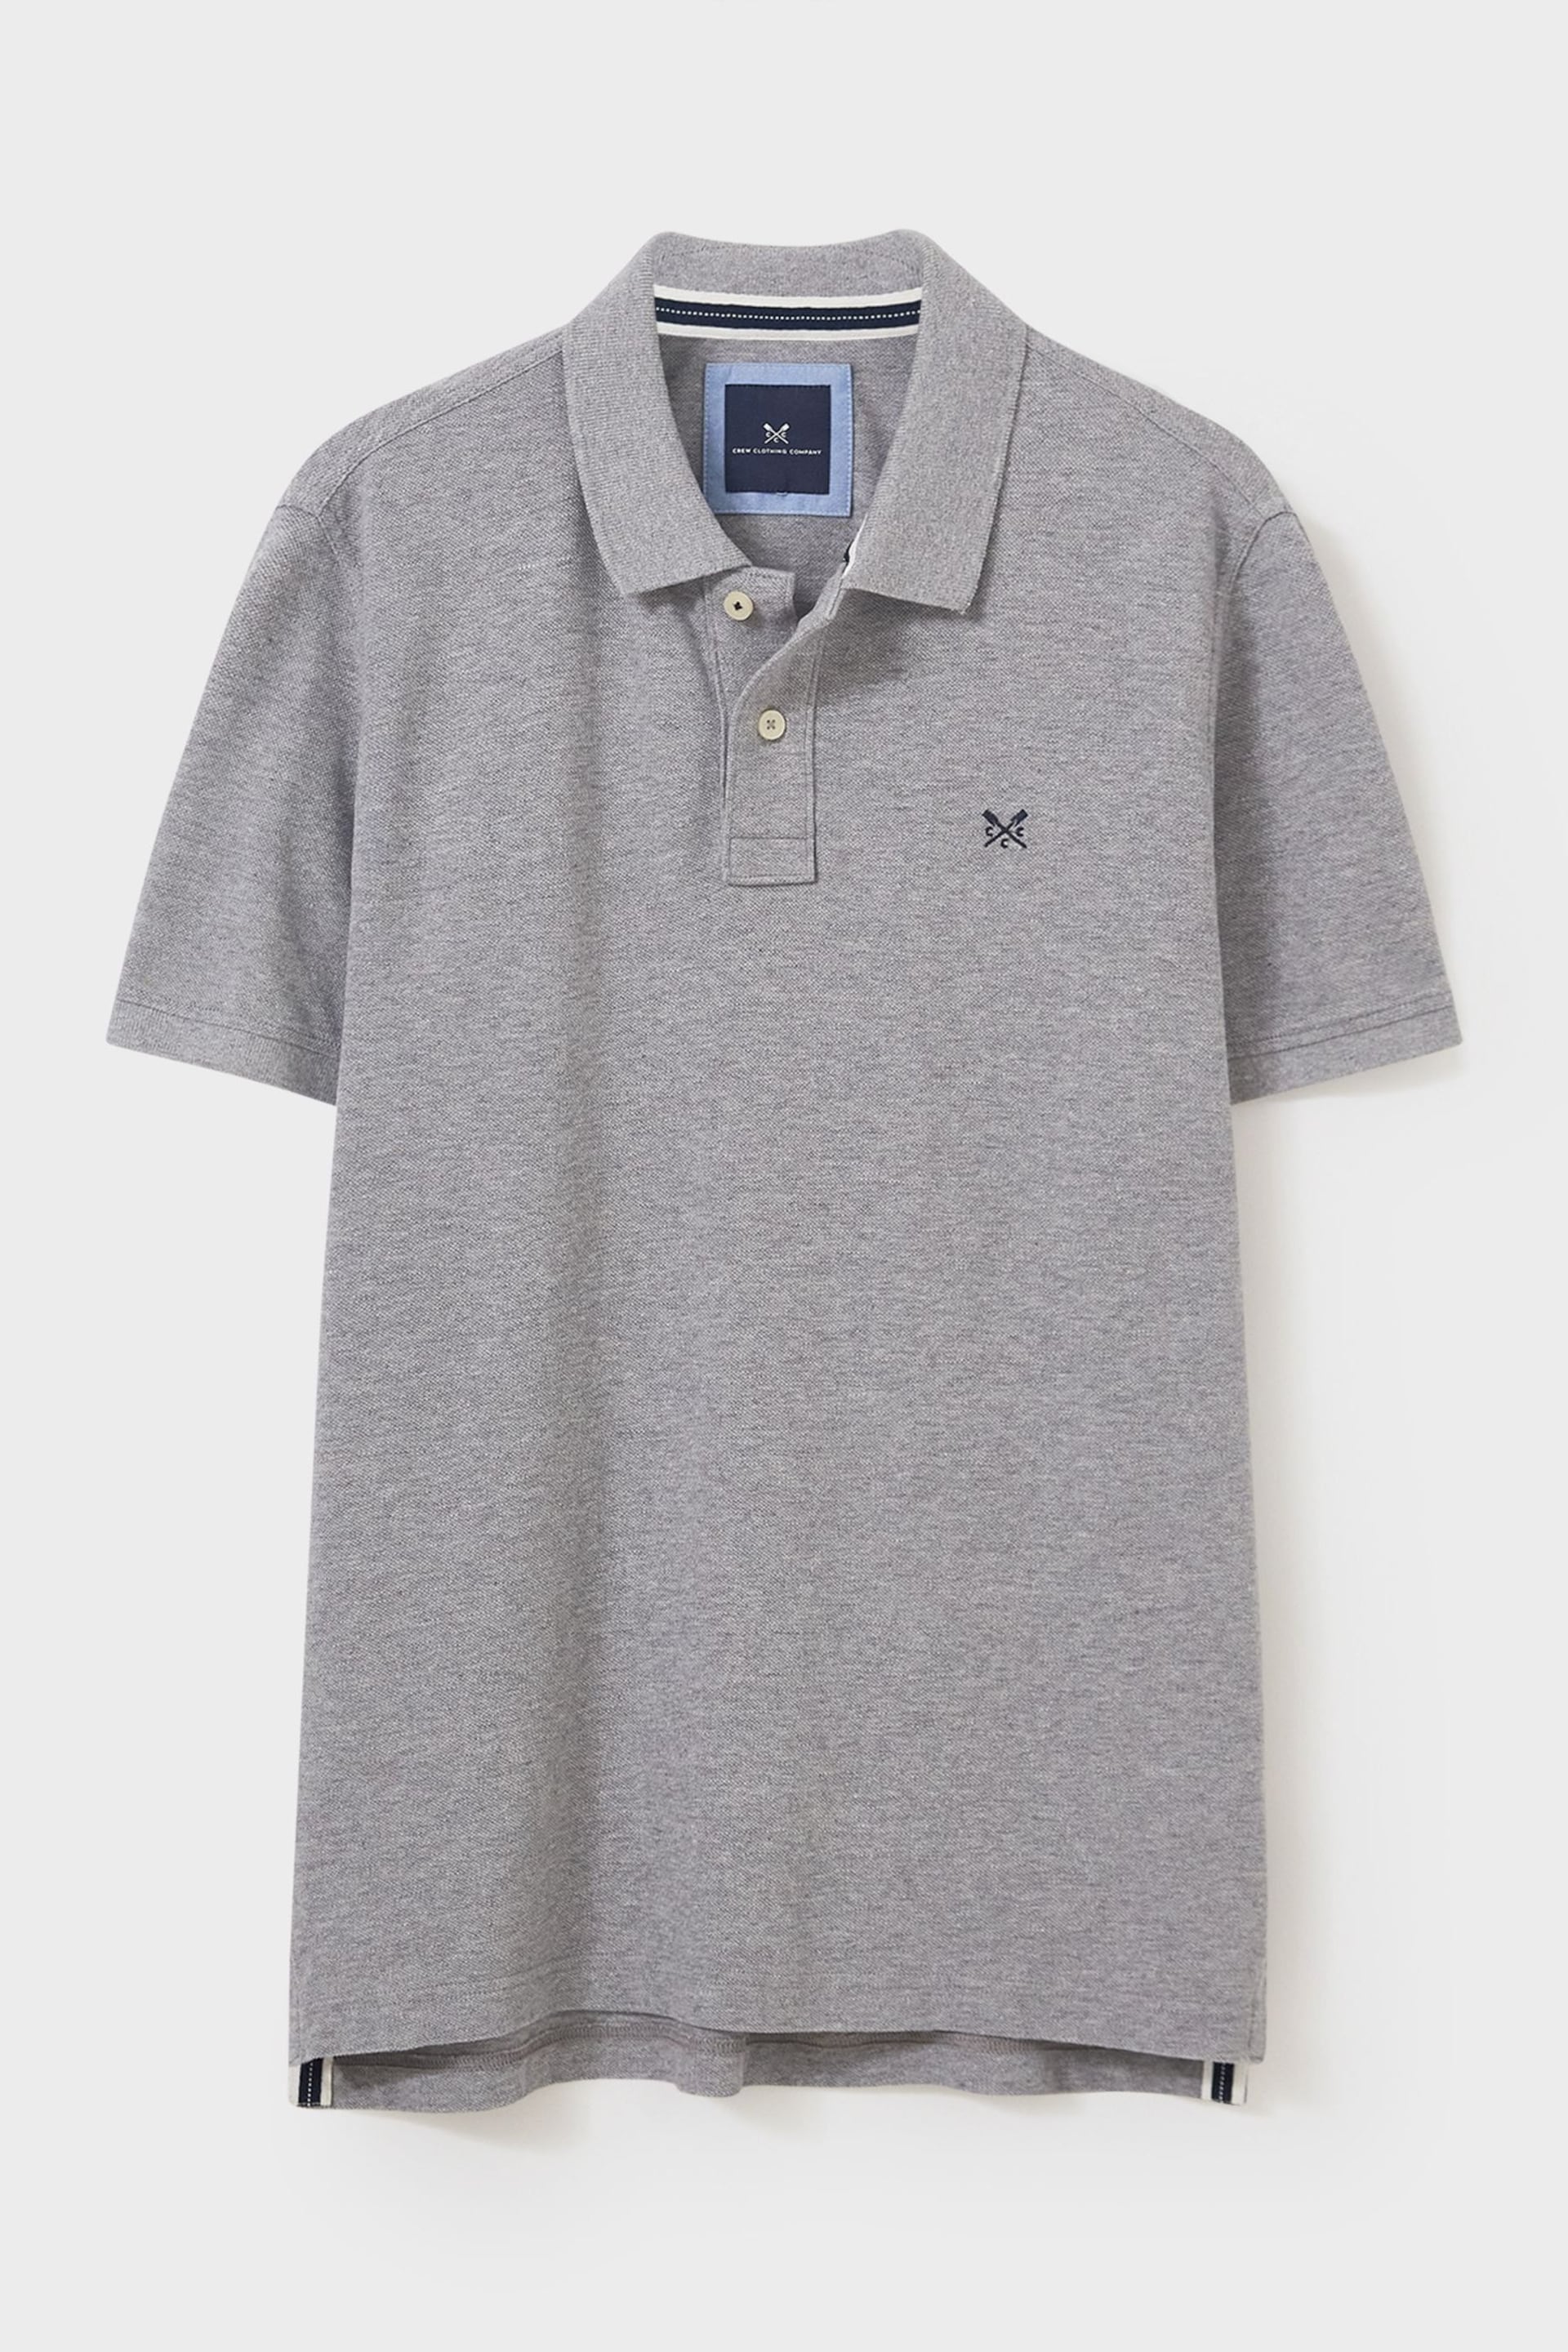 Crew Clothing Classic Cotton Pique Polo Shirt - Image 5 of 5